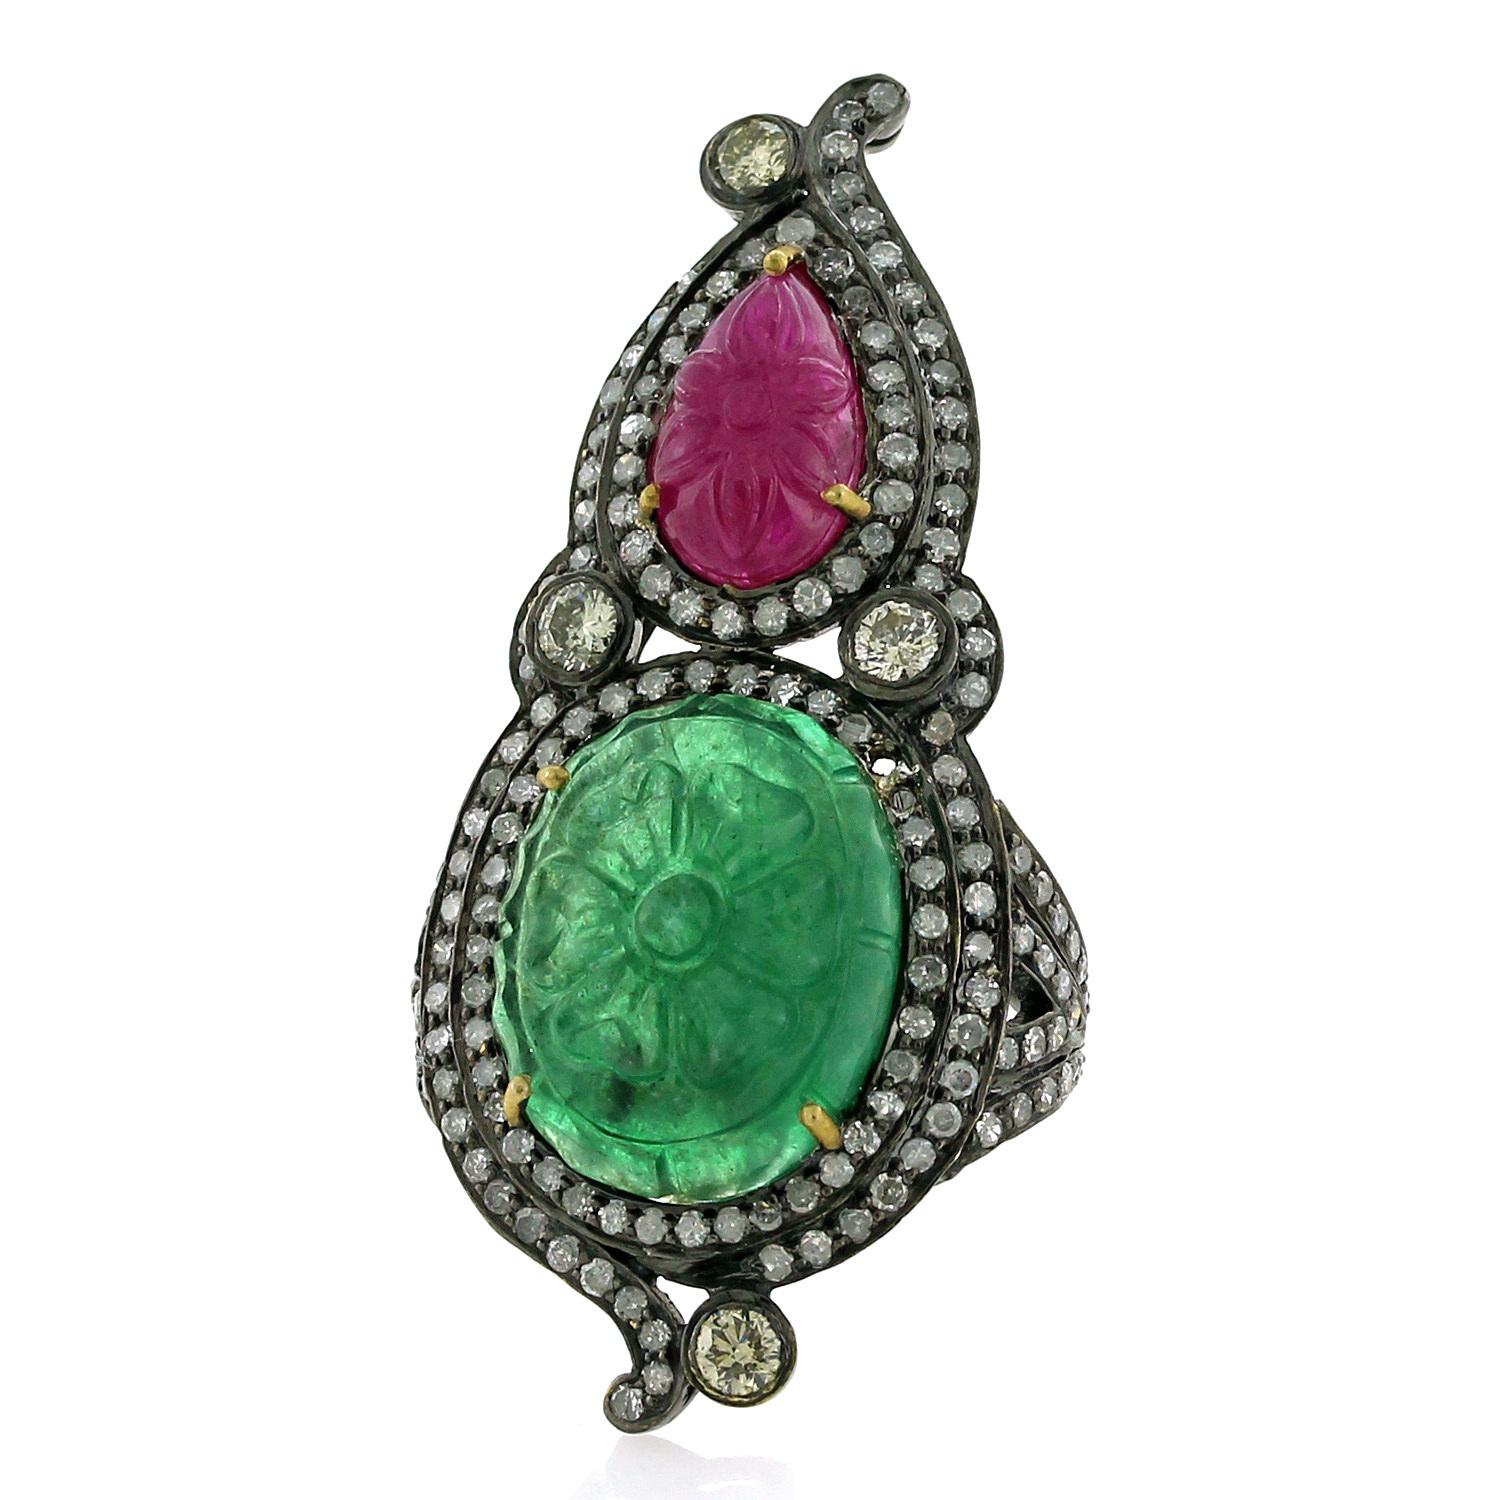 Carved Emerald, Ruby with pave diamonds around this knuckle ring is a very attractive and beautiful looking.

Ring size: 7 ( Can be sized for a cost )

18k:0.49gms
Diamond: 2.21cts
Silver: 6.81gms
Emerald: 8.25cts
Ruby: 3.40cts